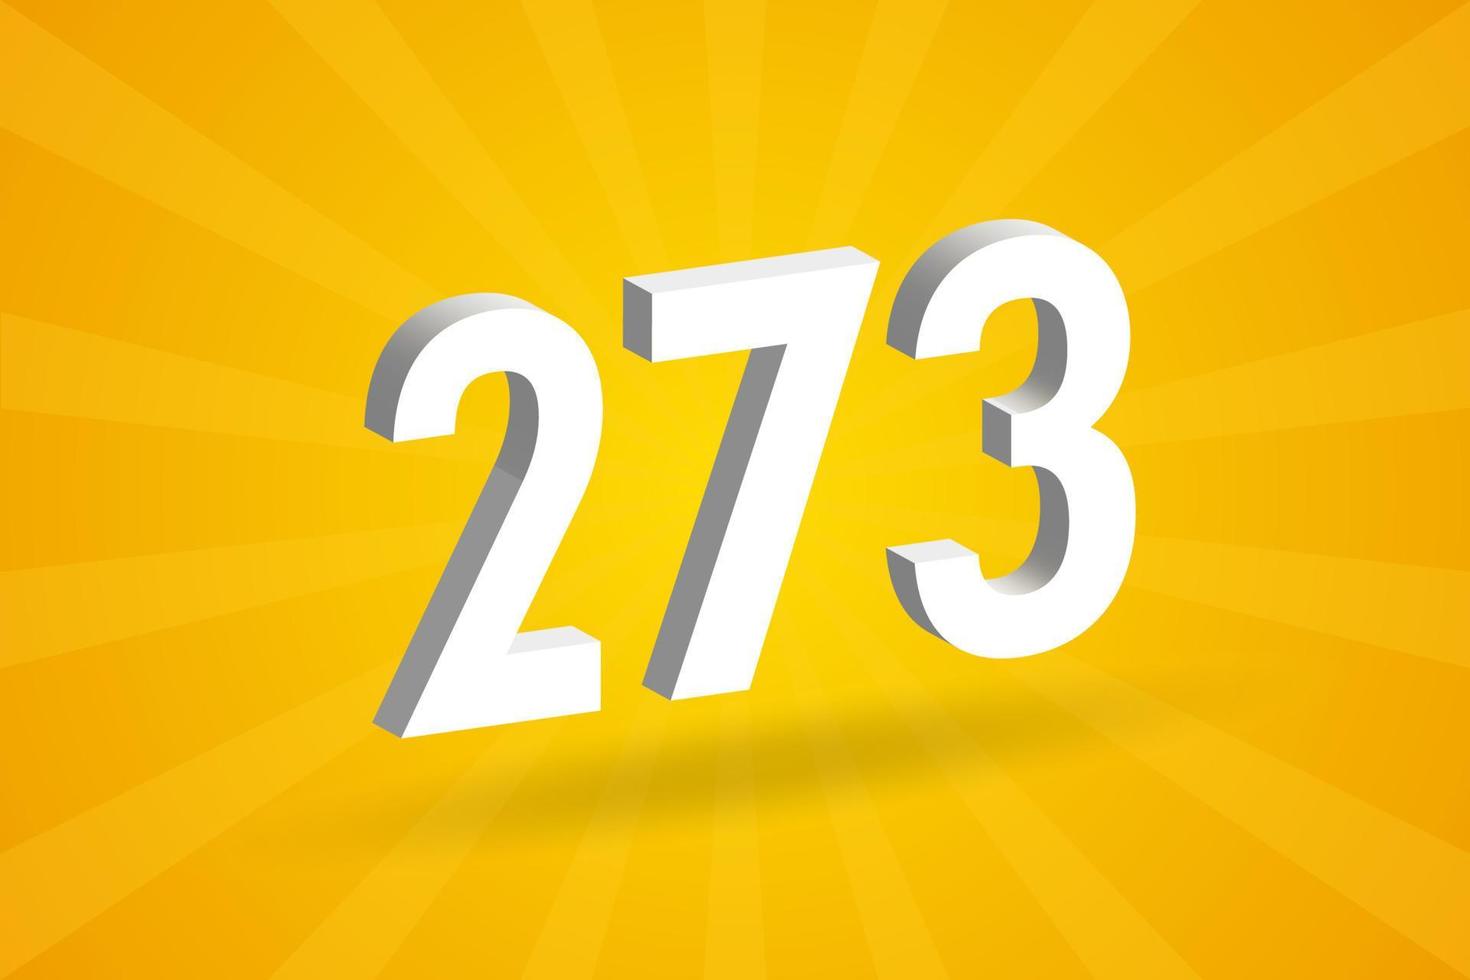 3D 273 number font alphabet. White 3D Number 273 with yellow background vector